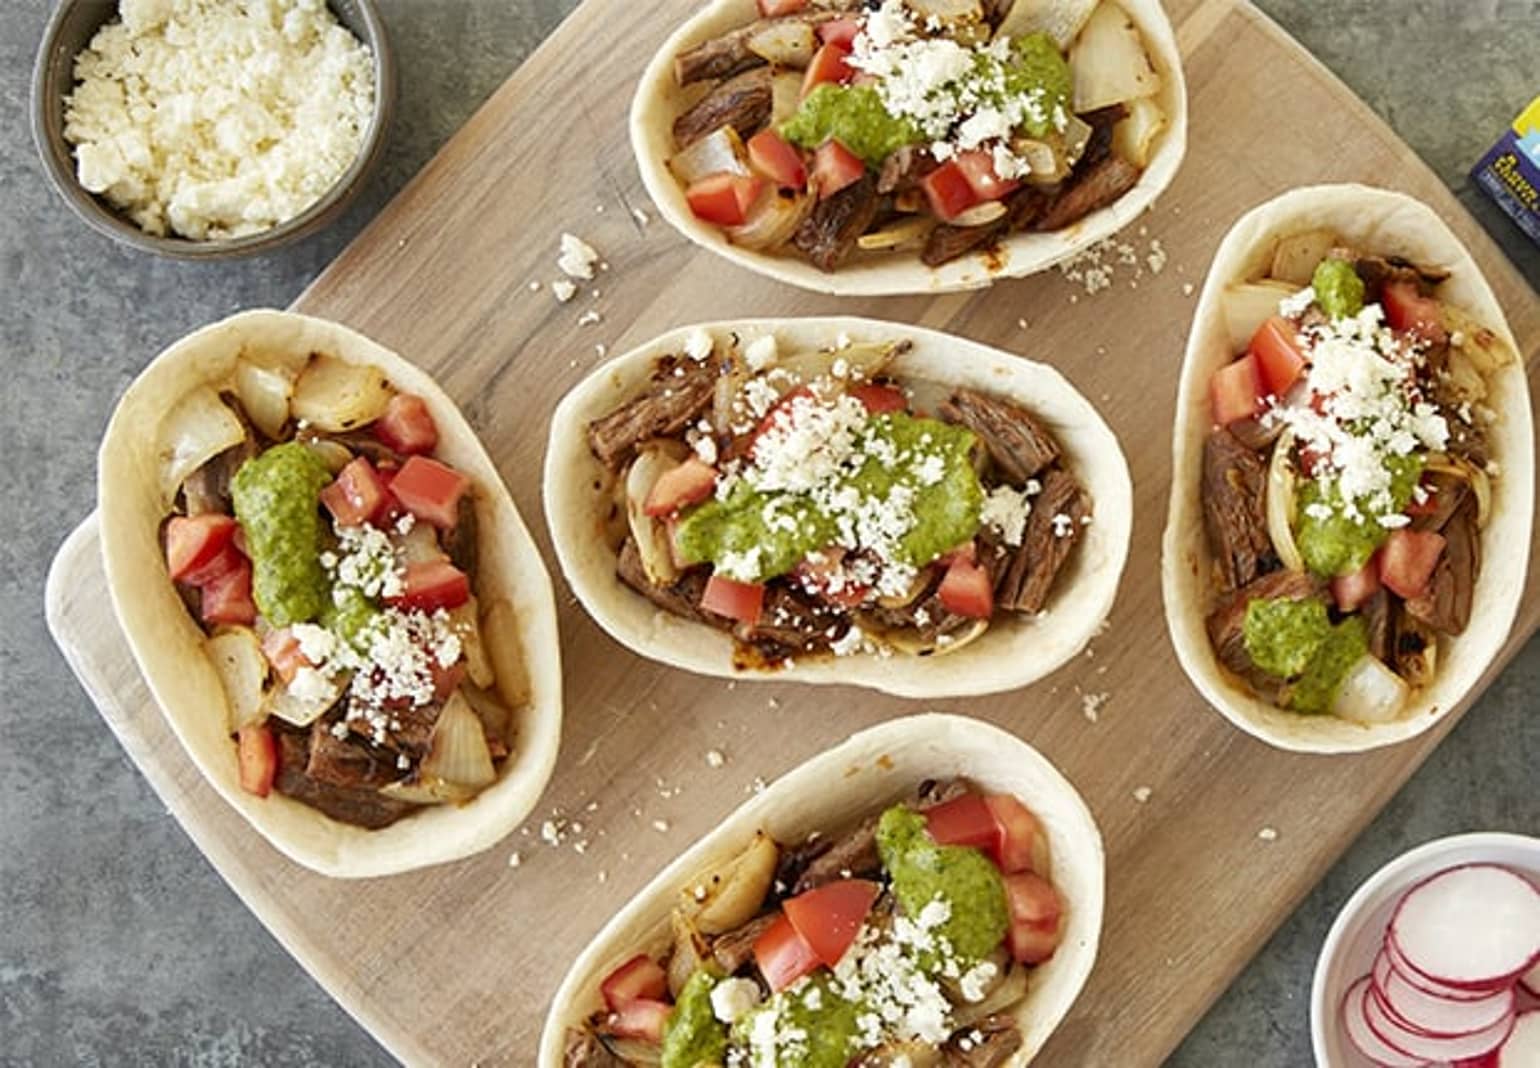 Grilled Steak Tacos with Green Chile Chimichurri